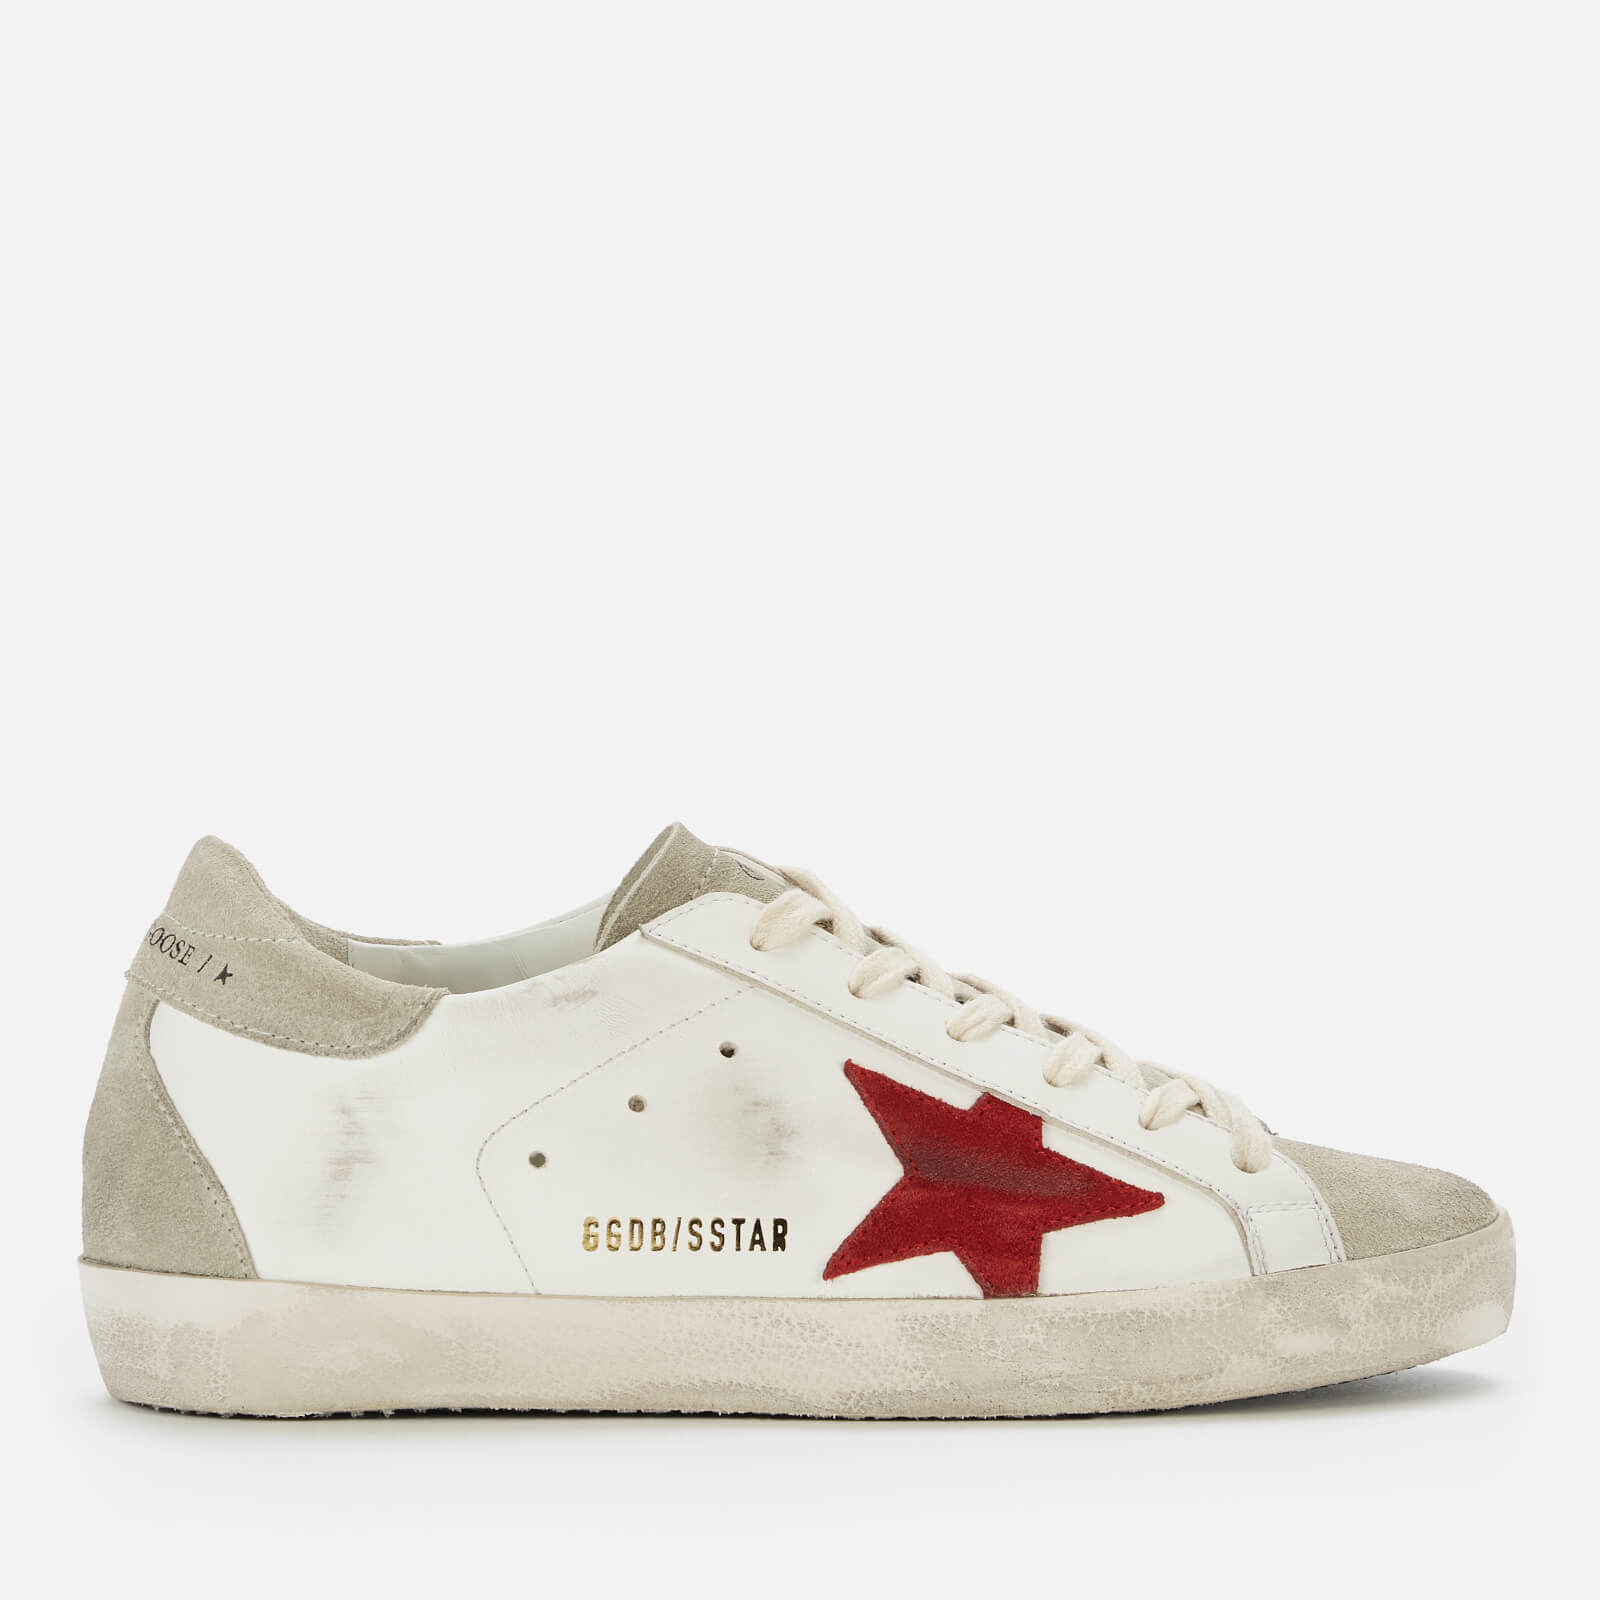 Golden Goose Deluxe Brand Women's Superstar Leather Trainers - White/Ice/Red - UK 3